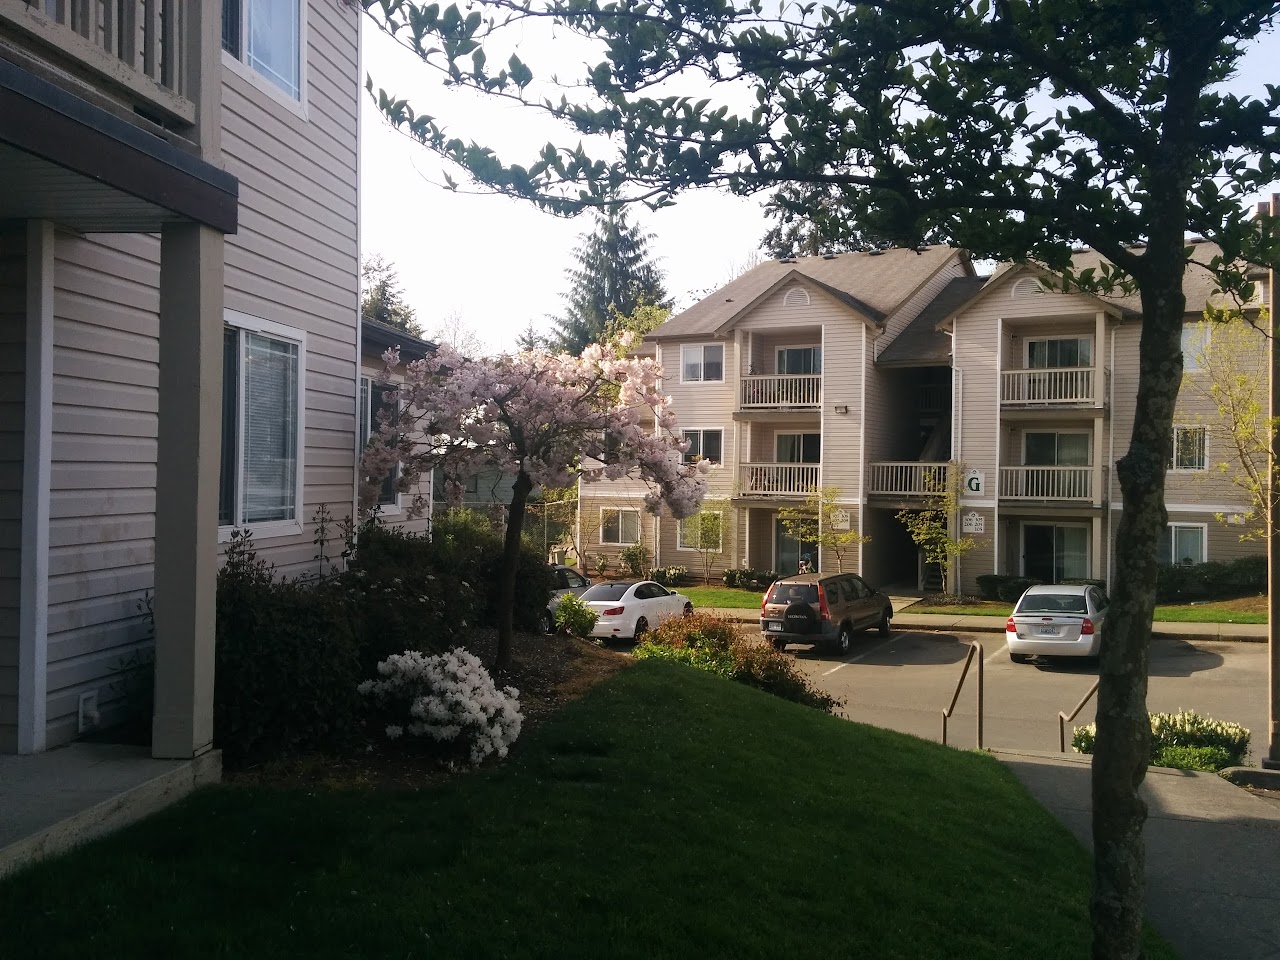 Photo of LINCOLN WAY APARTMENTS - PHASE 2. Affordable housing located at 2721 LINCOLN WAY LYNNWOOD, WA 98037